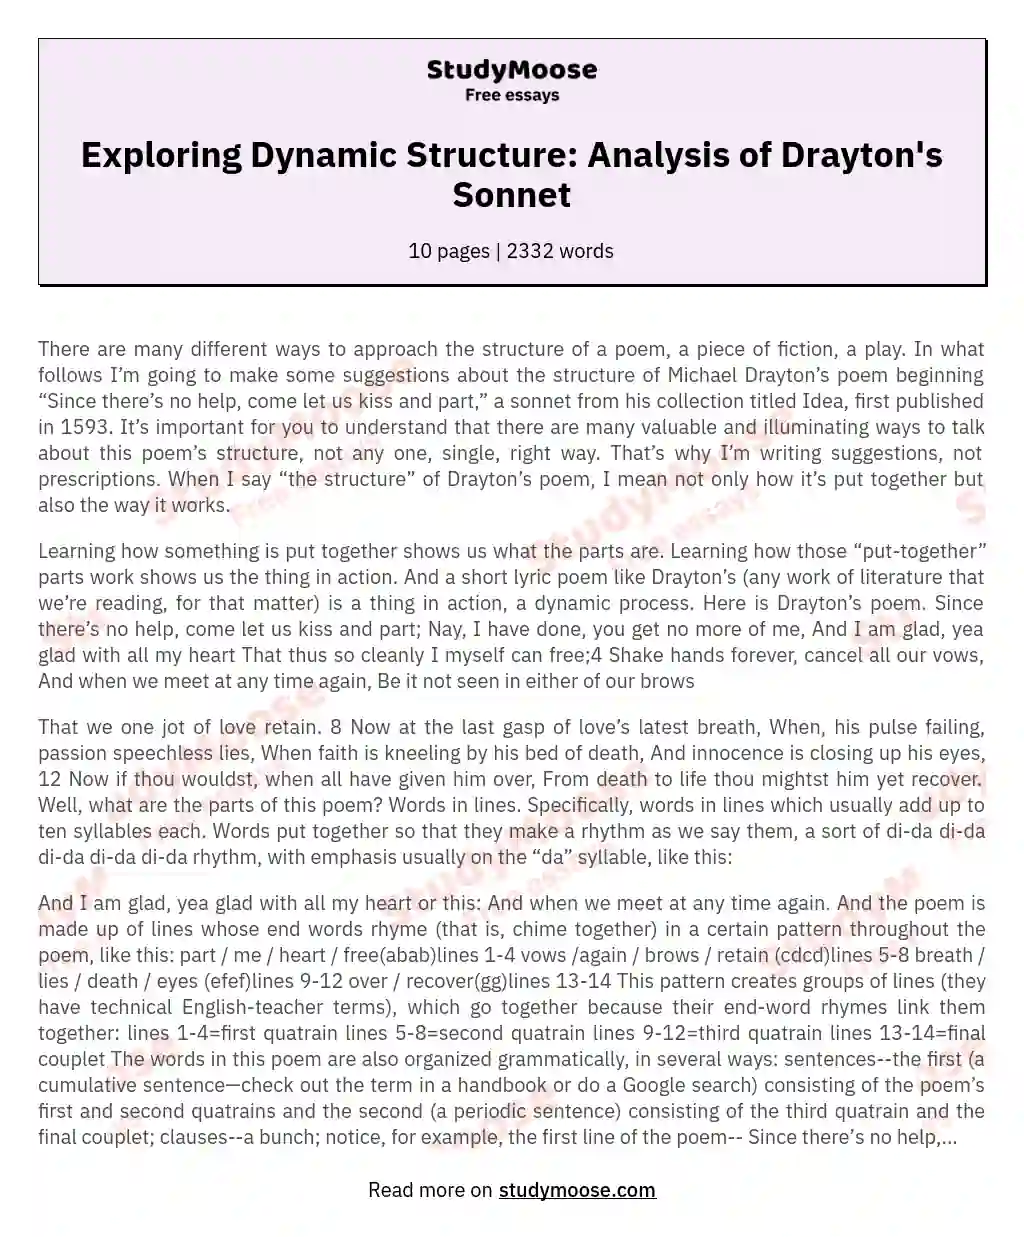 Exploring Dynamic Structure: Analysis of Drayton's Sonnet essay